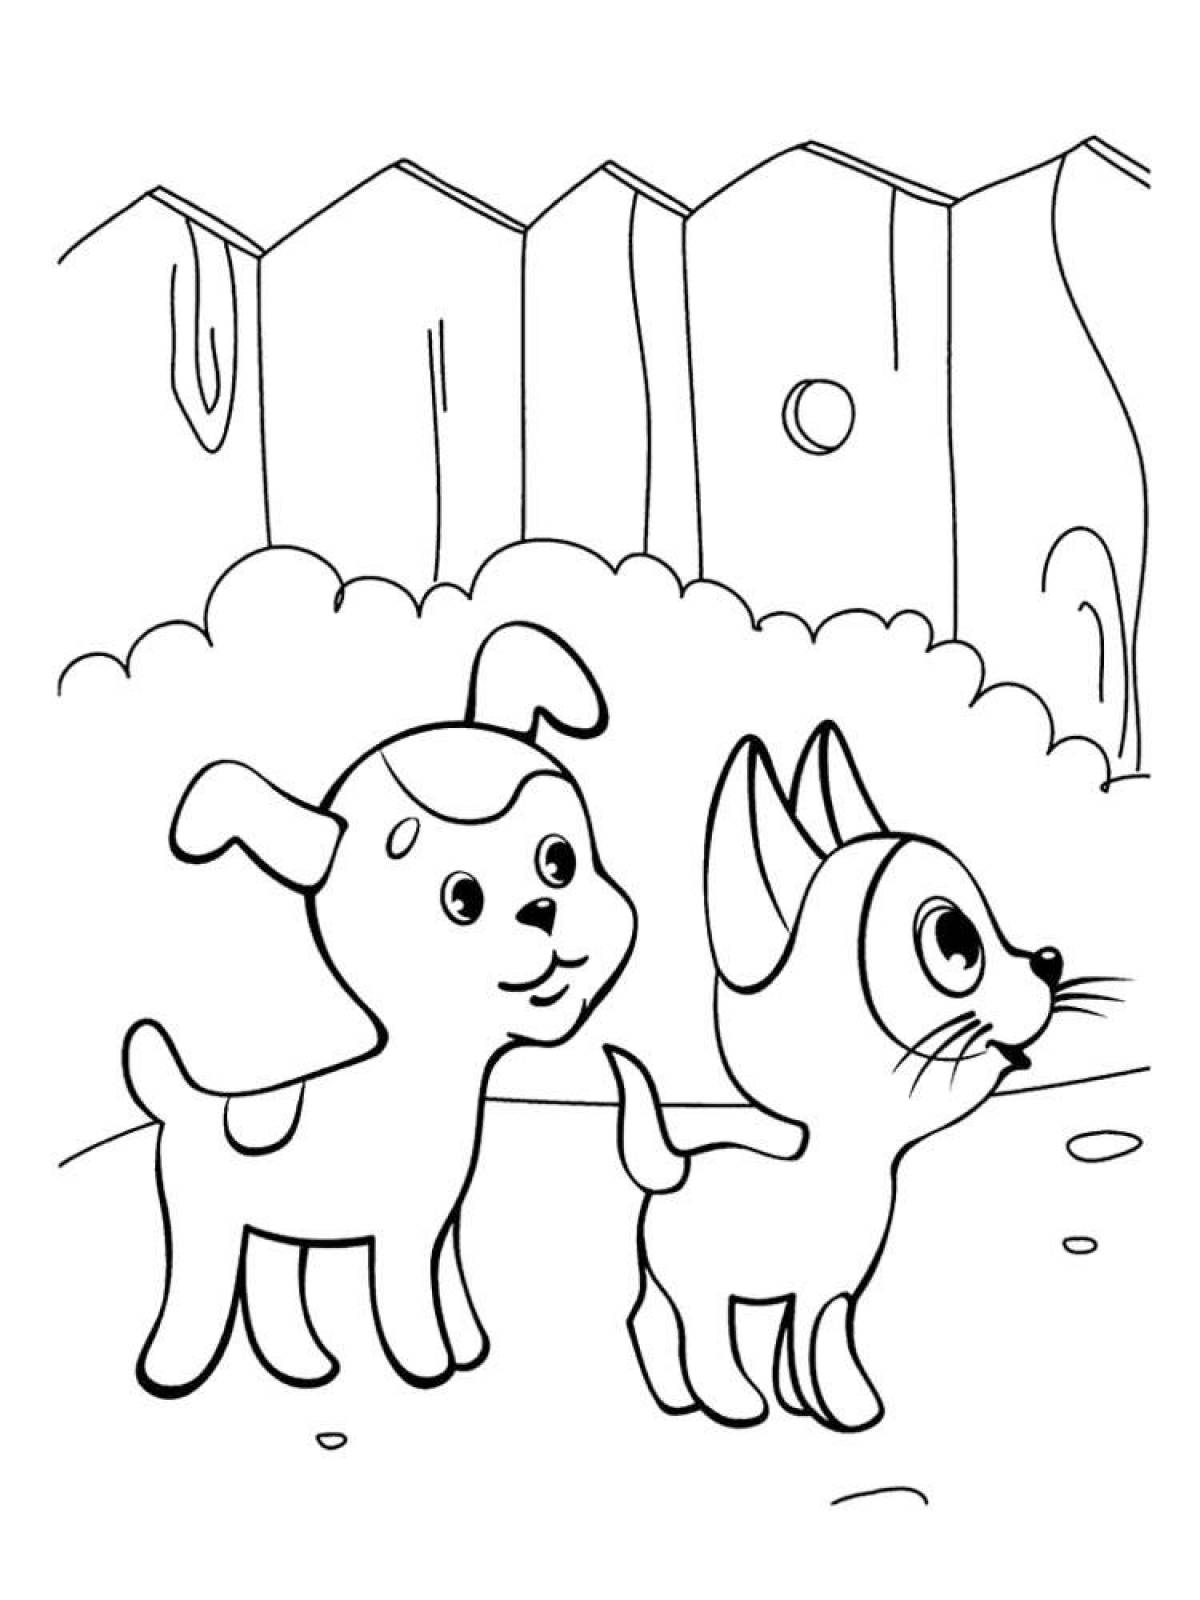 Live kitten coloring book